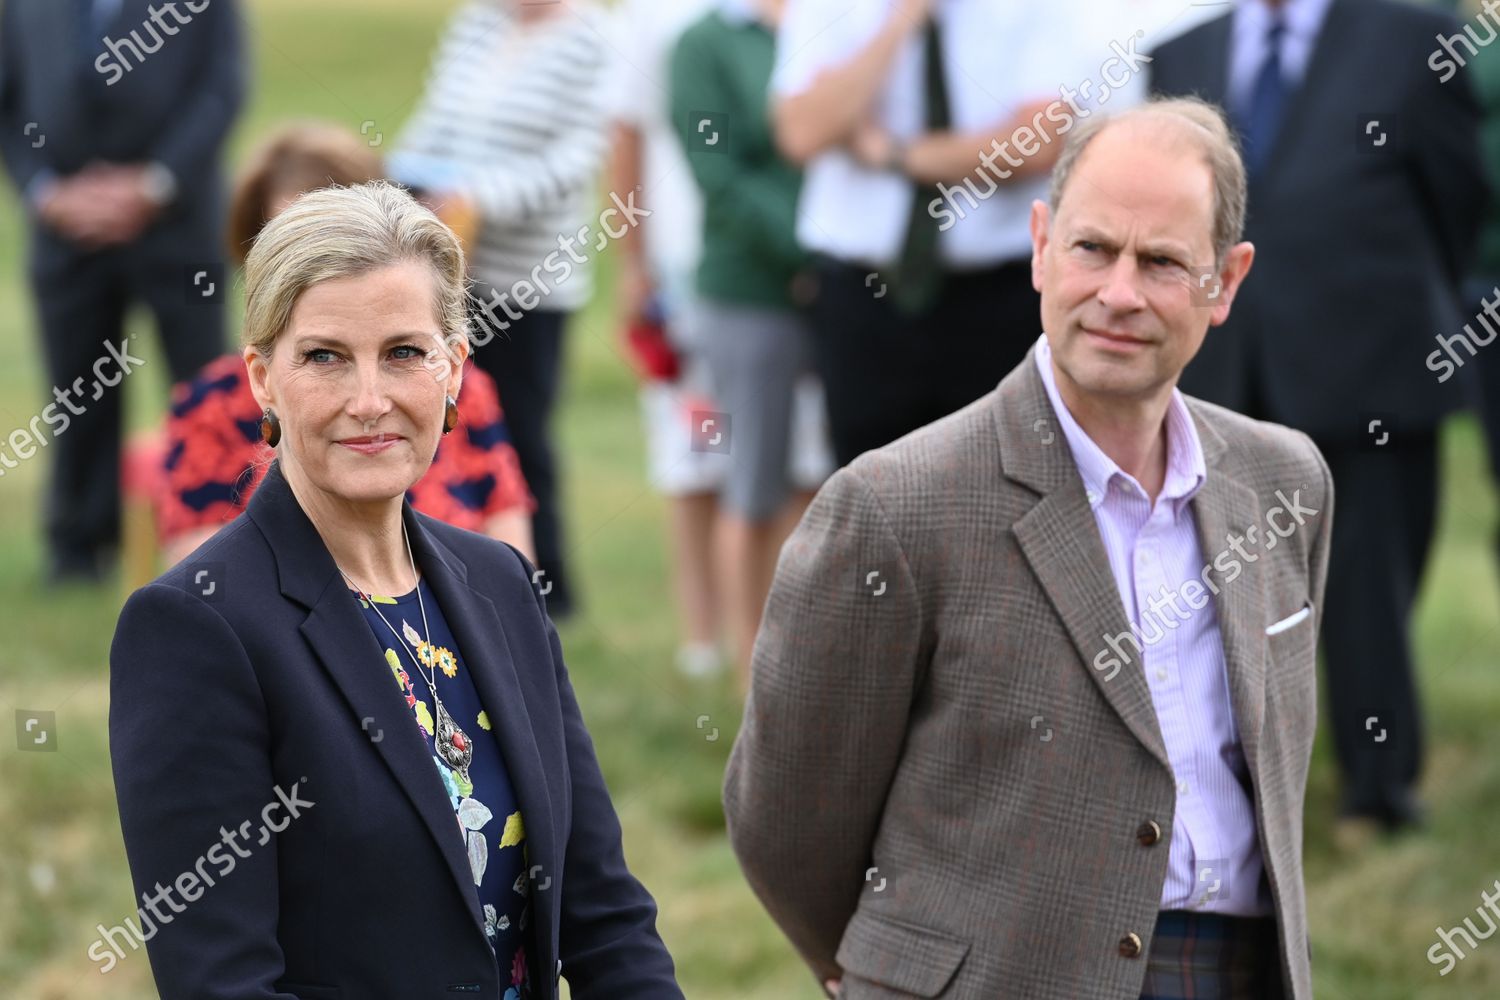 prince-edward-and-sophie-countess-of-wessex-visit-to-forfar-golf-club-scotland-uk-shutterstock-editorial-12172307j.jpg